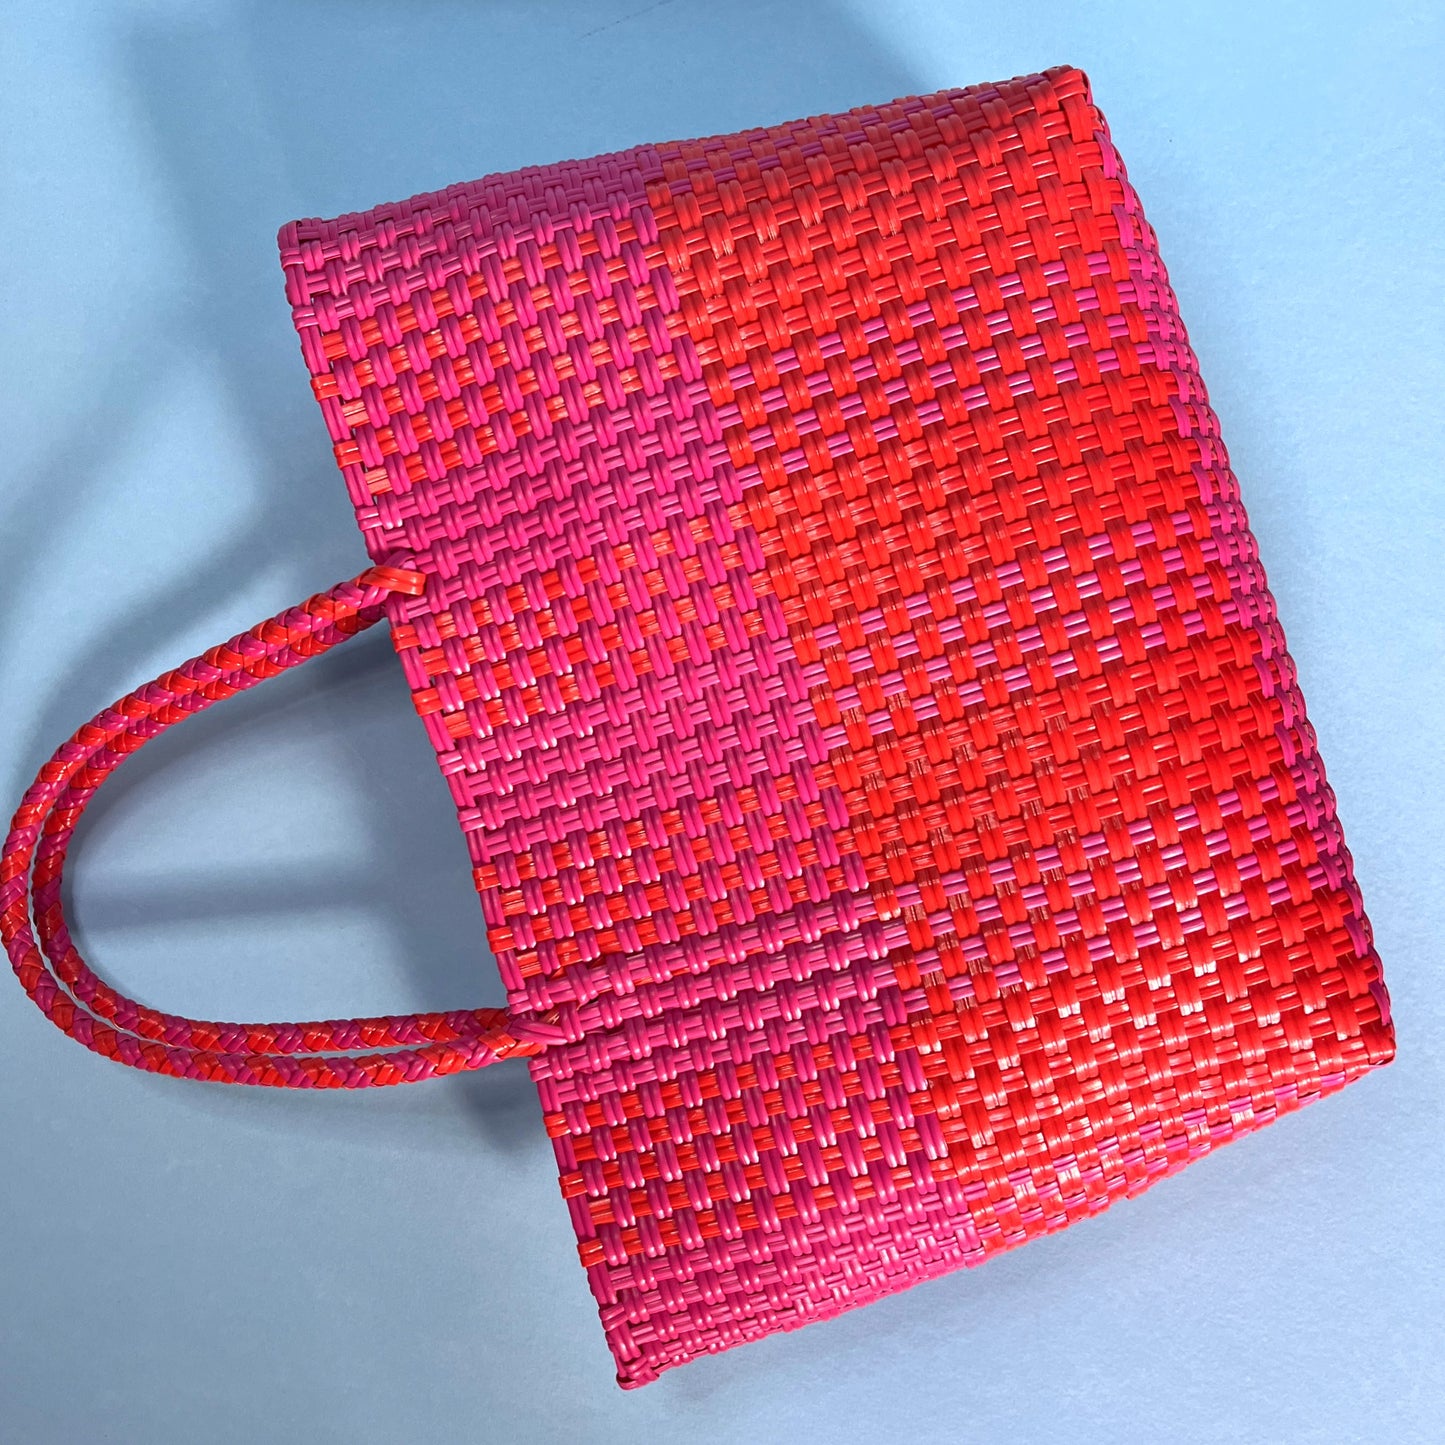 Bicycle Pannier recycled red & orange plastic woven basket tote bag